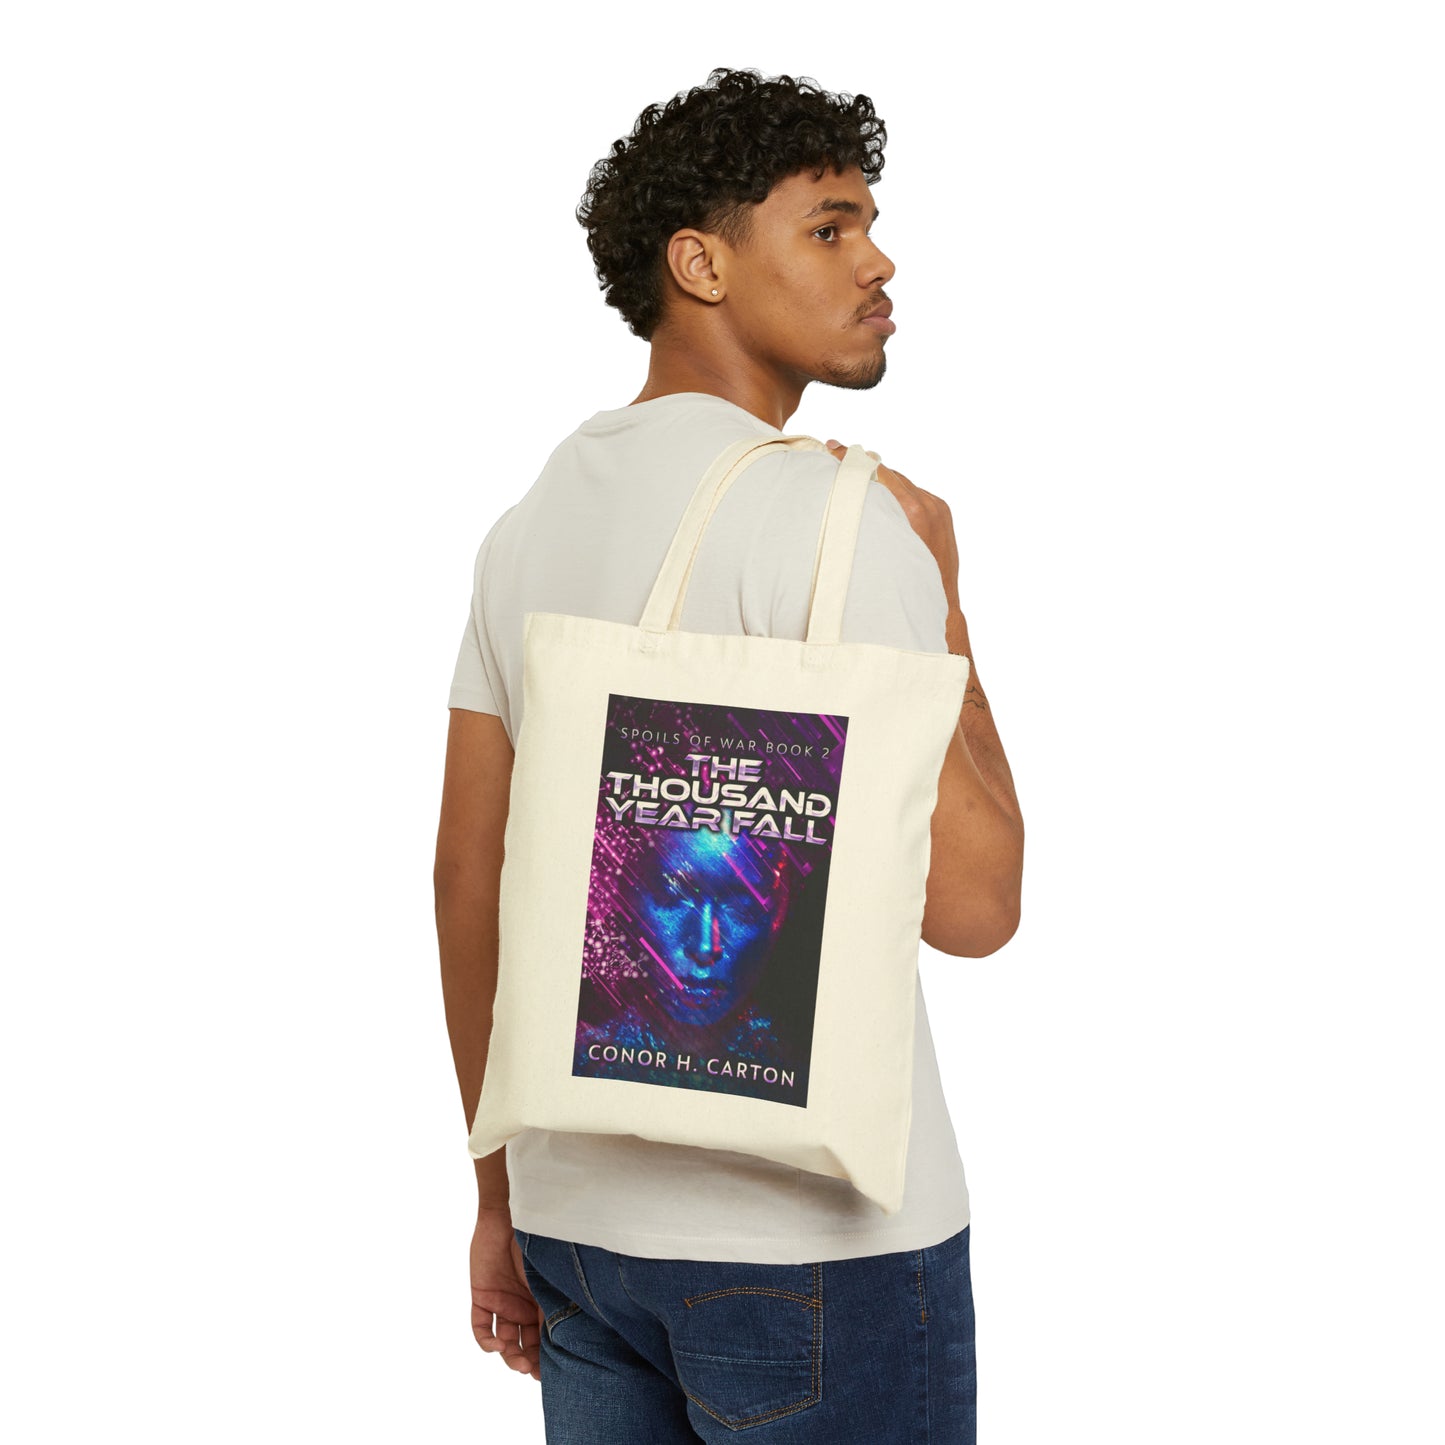 The Thousand Year Fall - Cotton Canvas Tote Bag